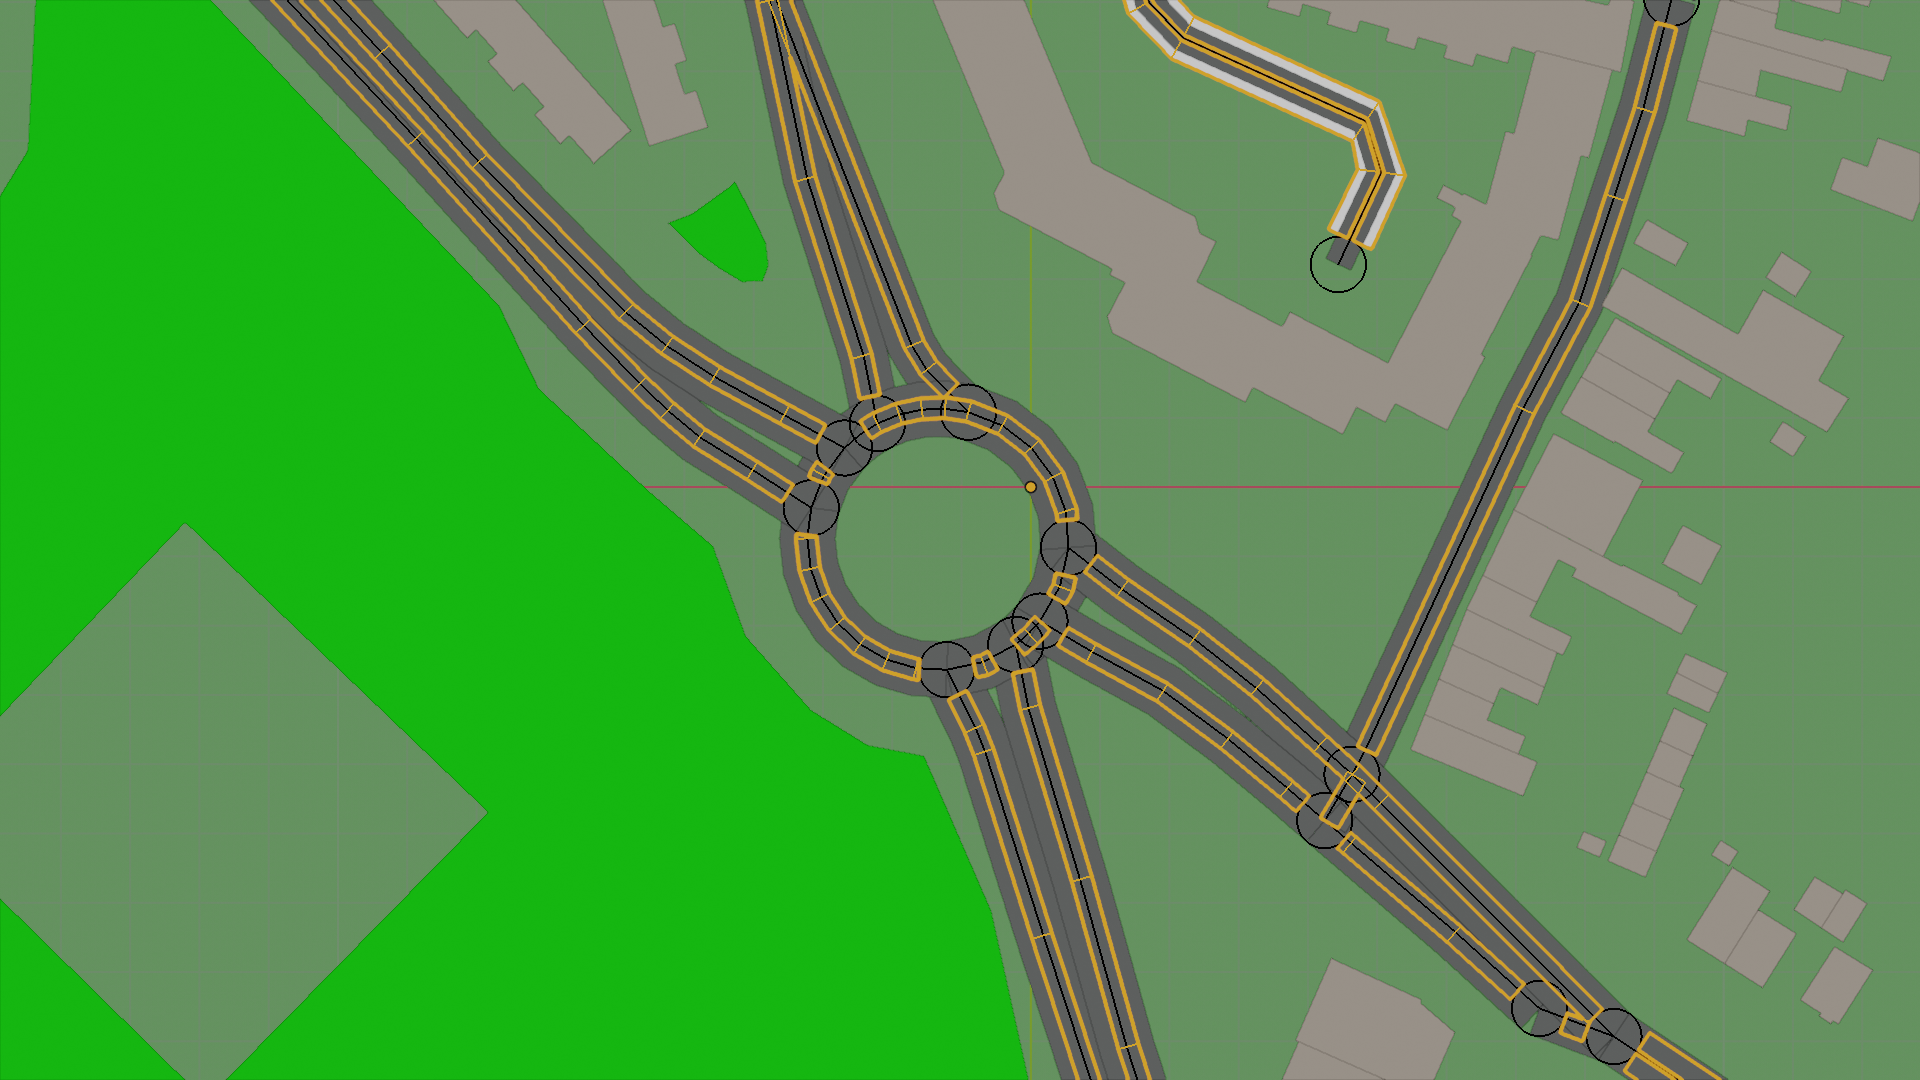 ../../_images/view3d-traffic-osm-sync.png